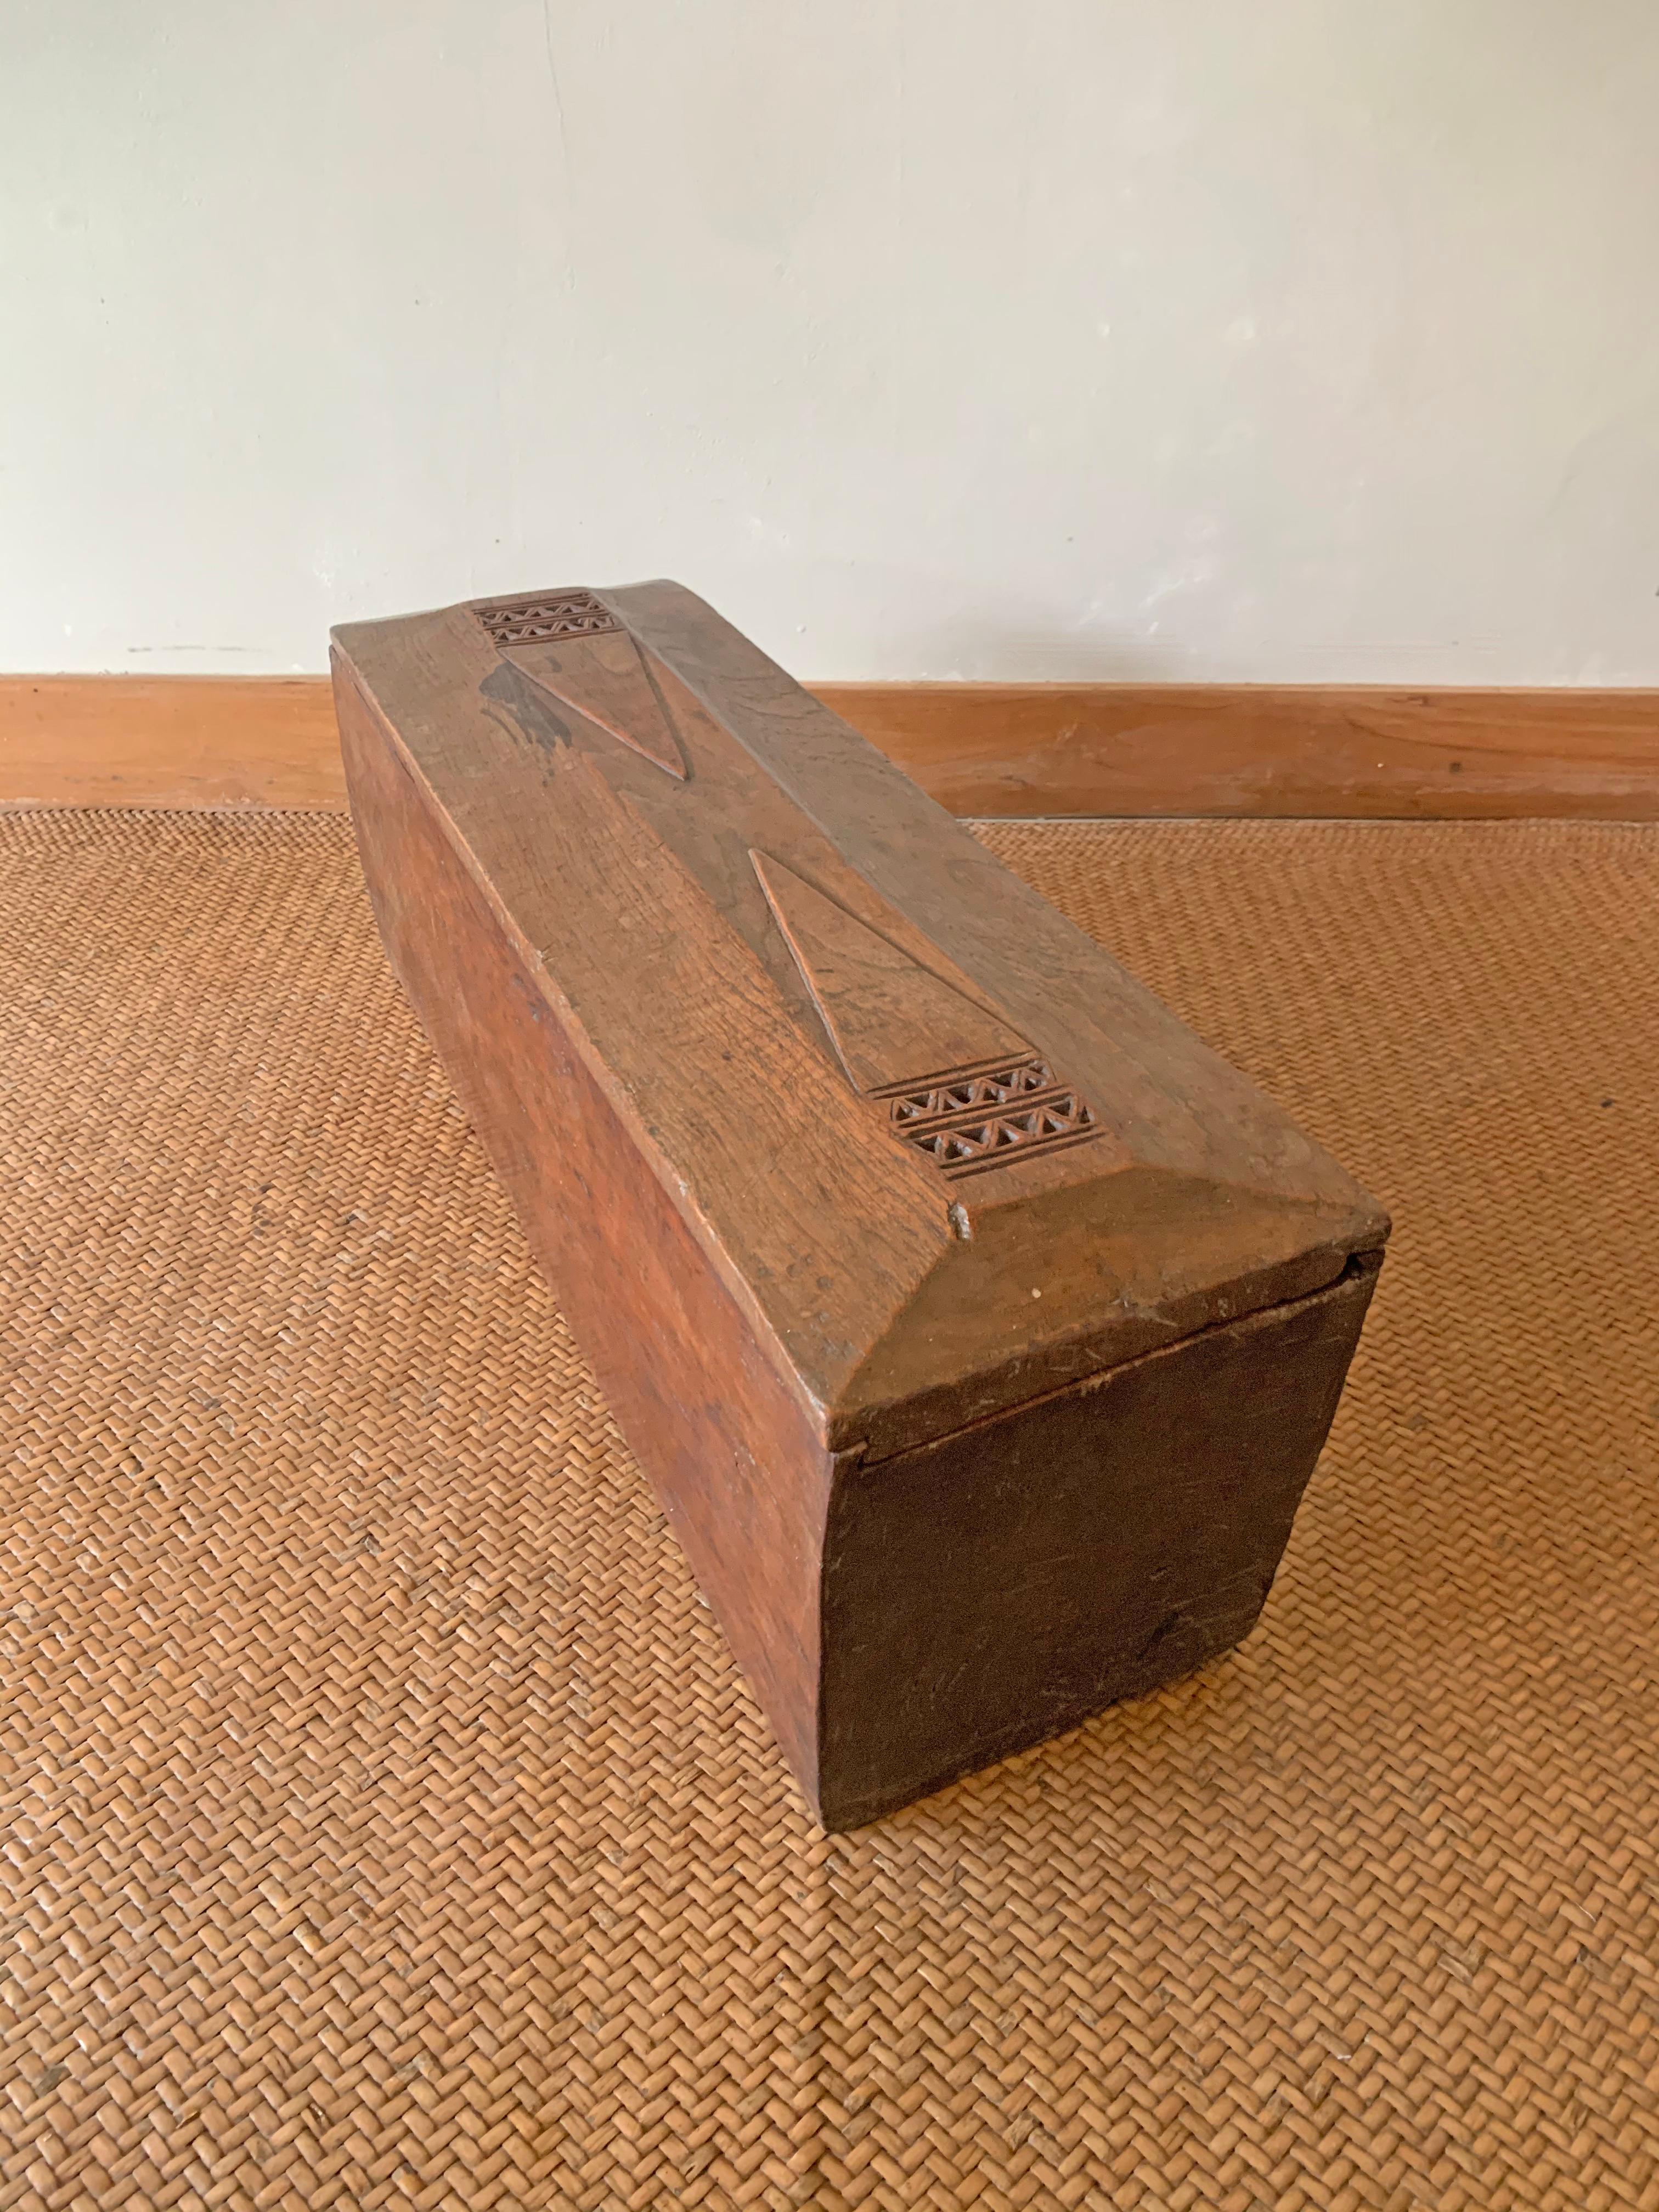 This teak storage box comes for the Island of Java, Indonesia. Dating to the Mid-20th Century it was crafted from a single block of teak. It features a sliding lid and has an elegant wood texture as well as wood engravings. There are some chips and